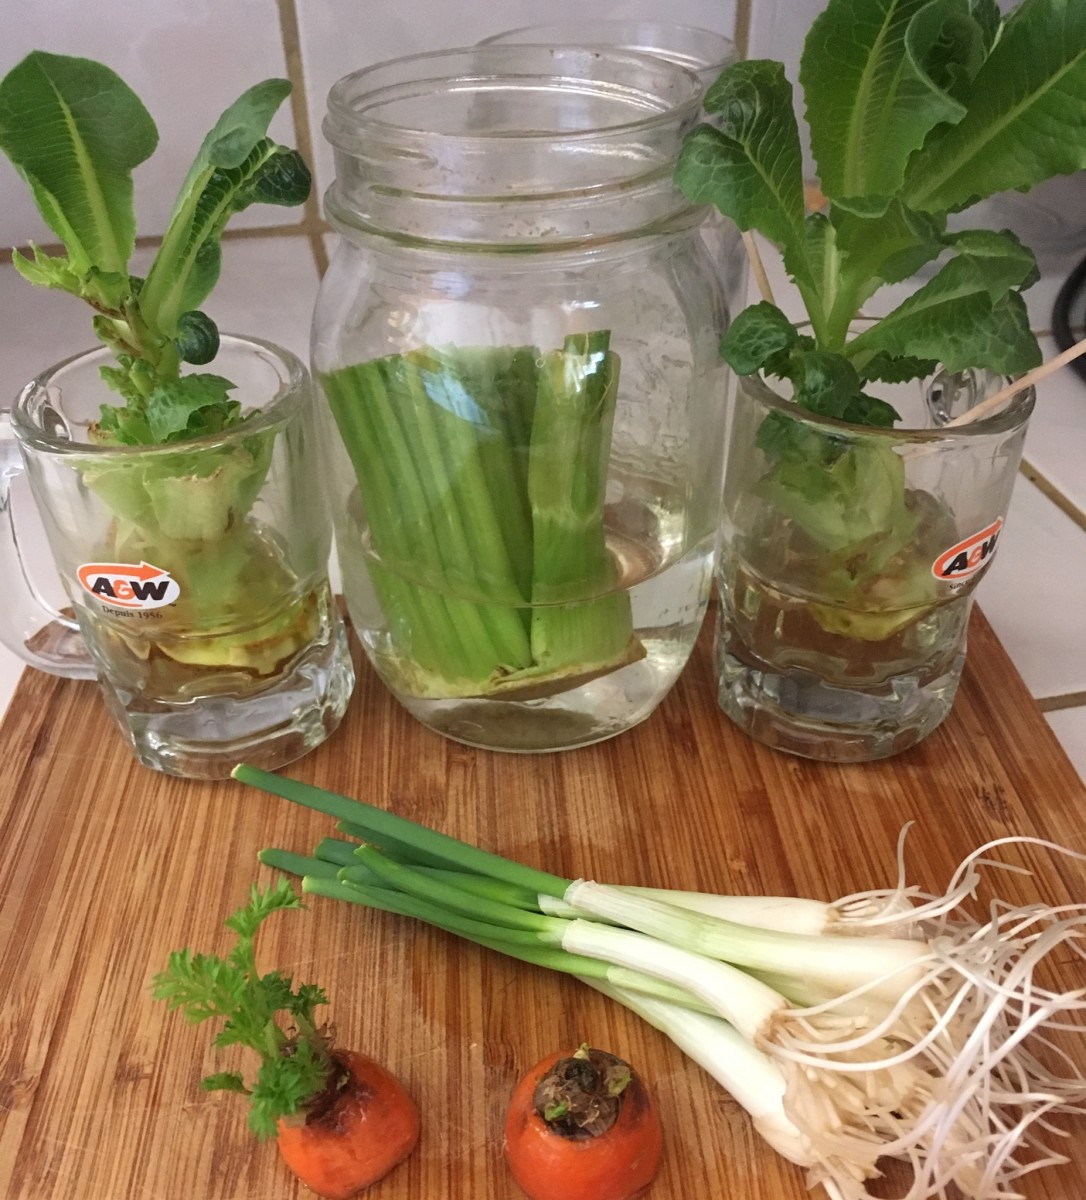 How to Regrow Herbs, Vegetables, and Fruits From Scraps